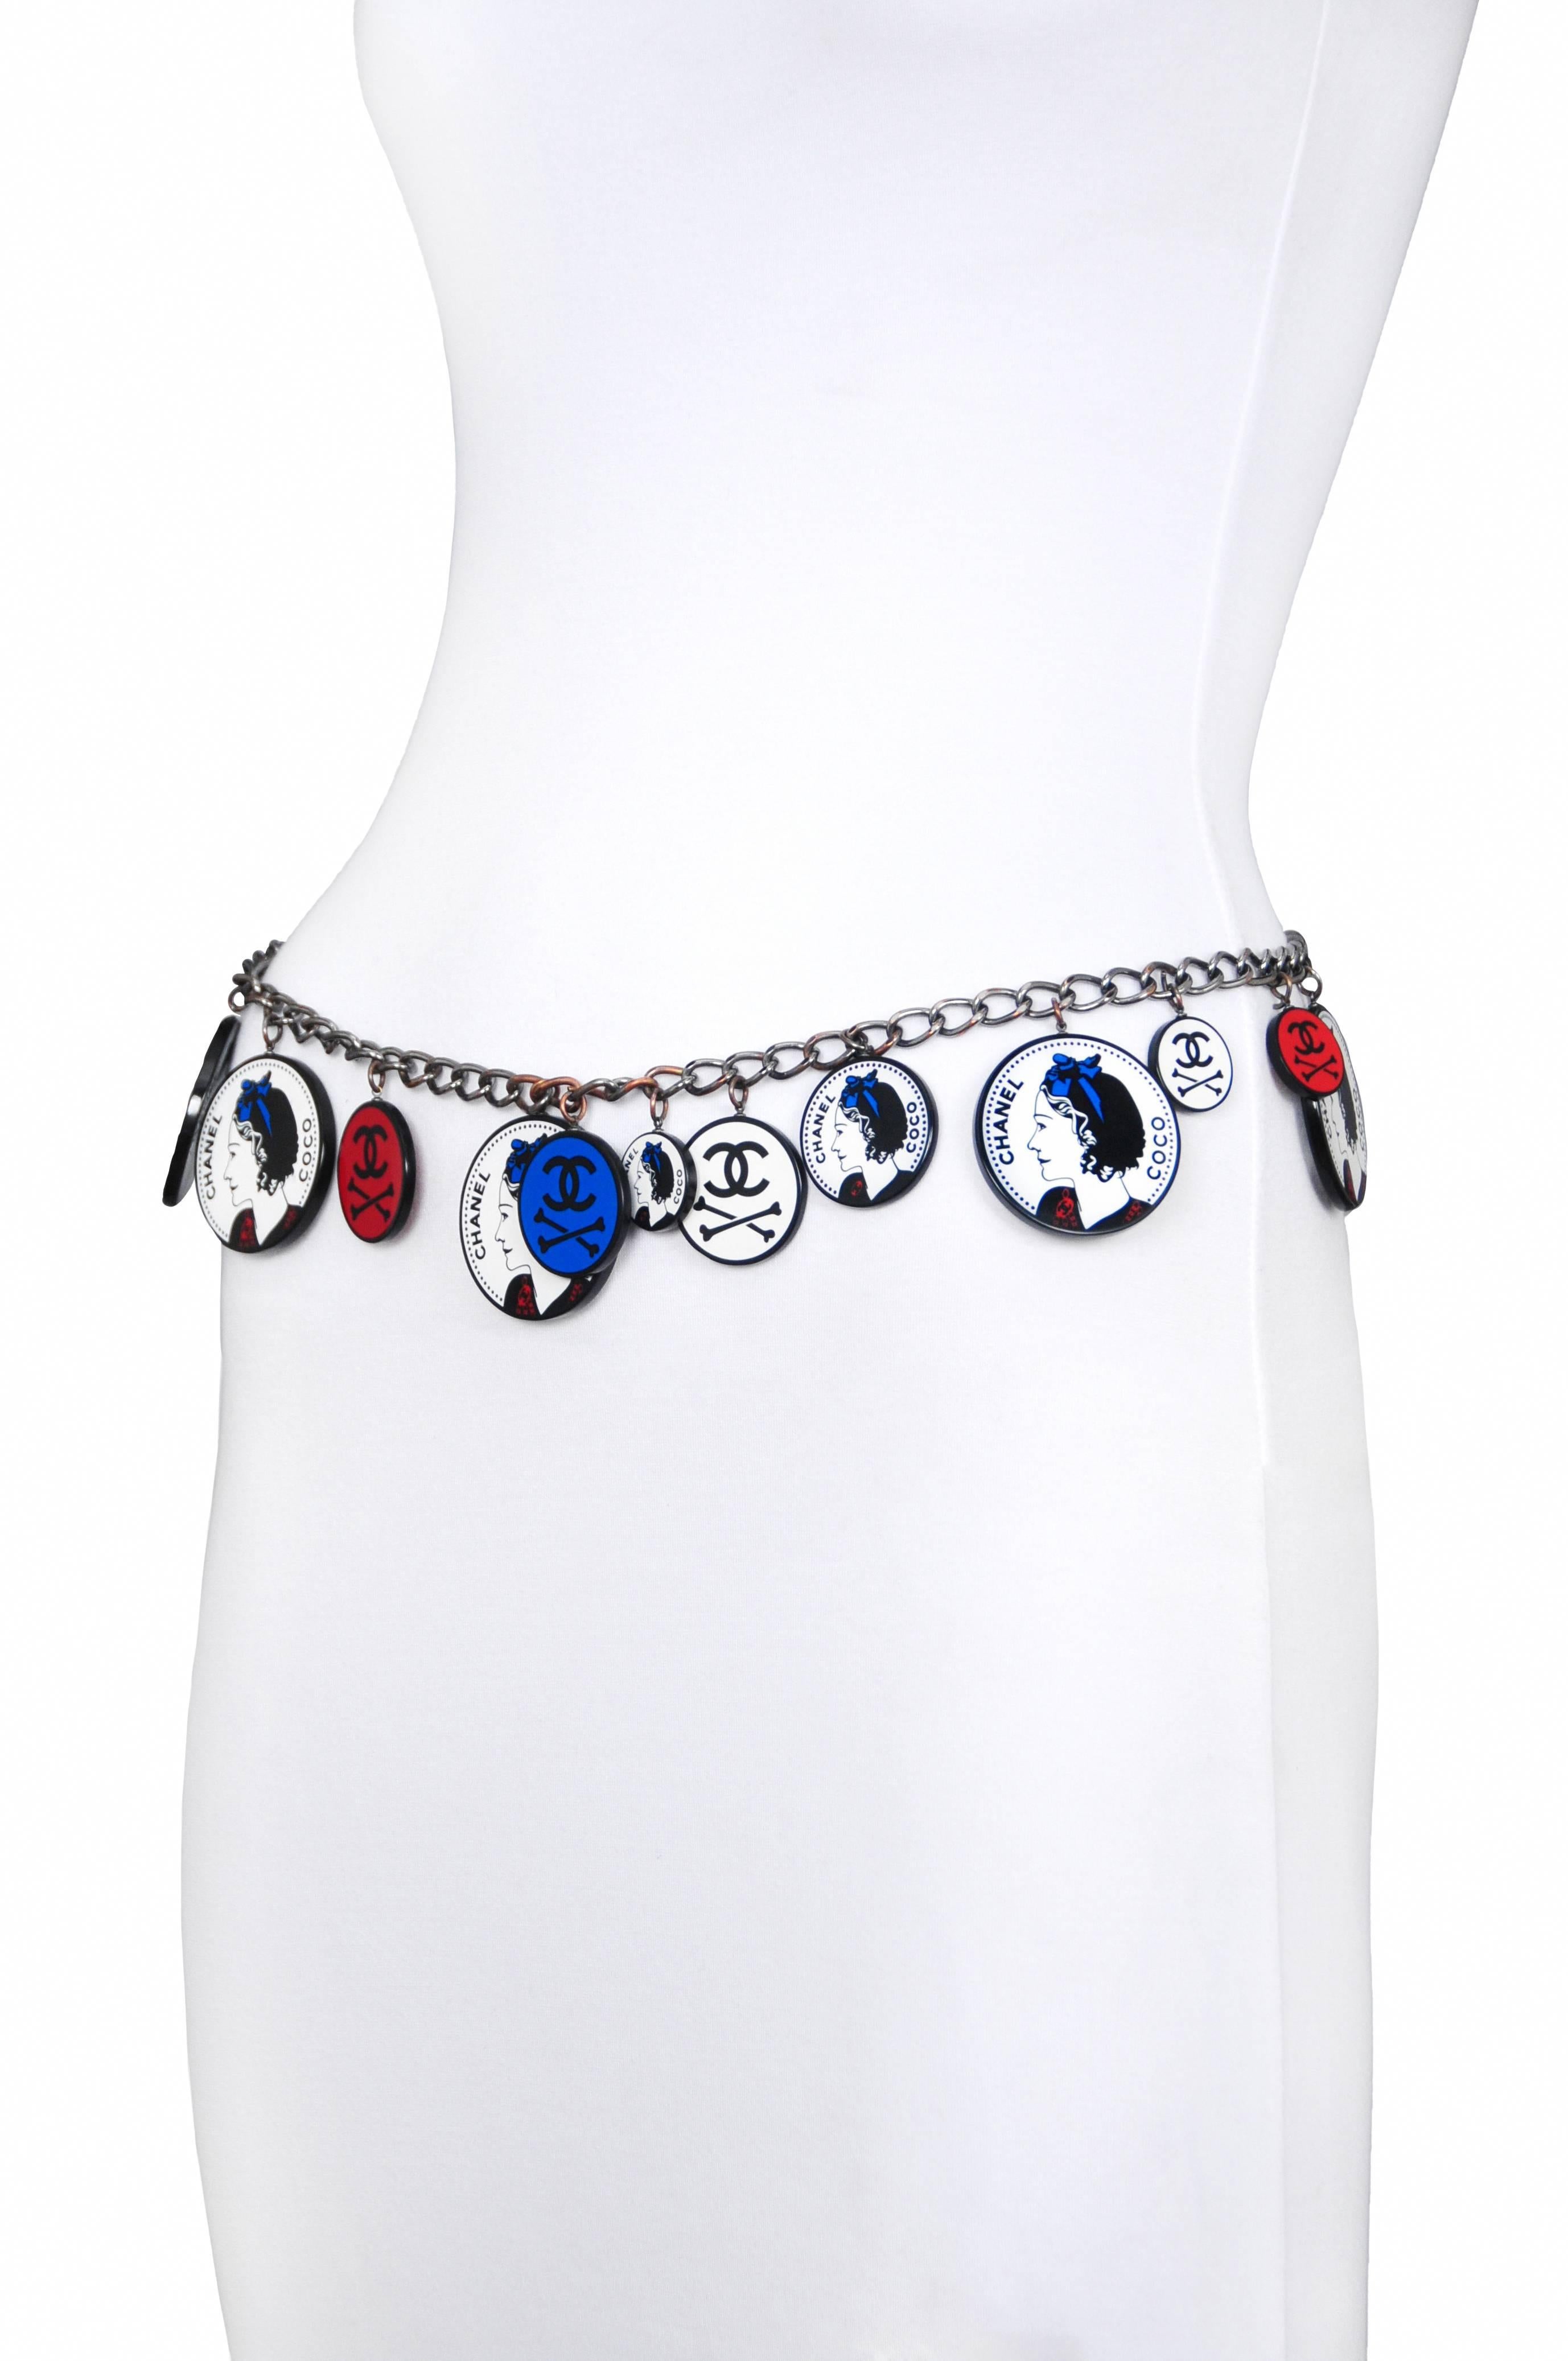 Vintage Chanel belt featuring charms bearing the portrait of Coco Chanel herself using the colors red, white and blue mixed with red, white and blue charms decorated with iconic Chanel interlocking CC's and crossbones that hang from a silver tone